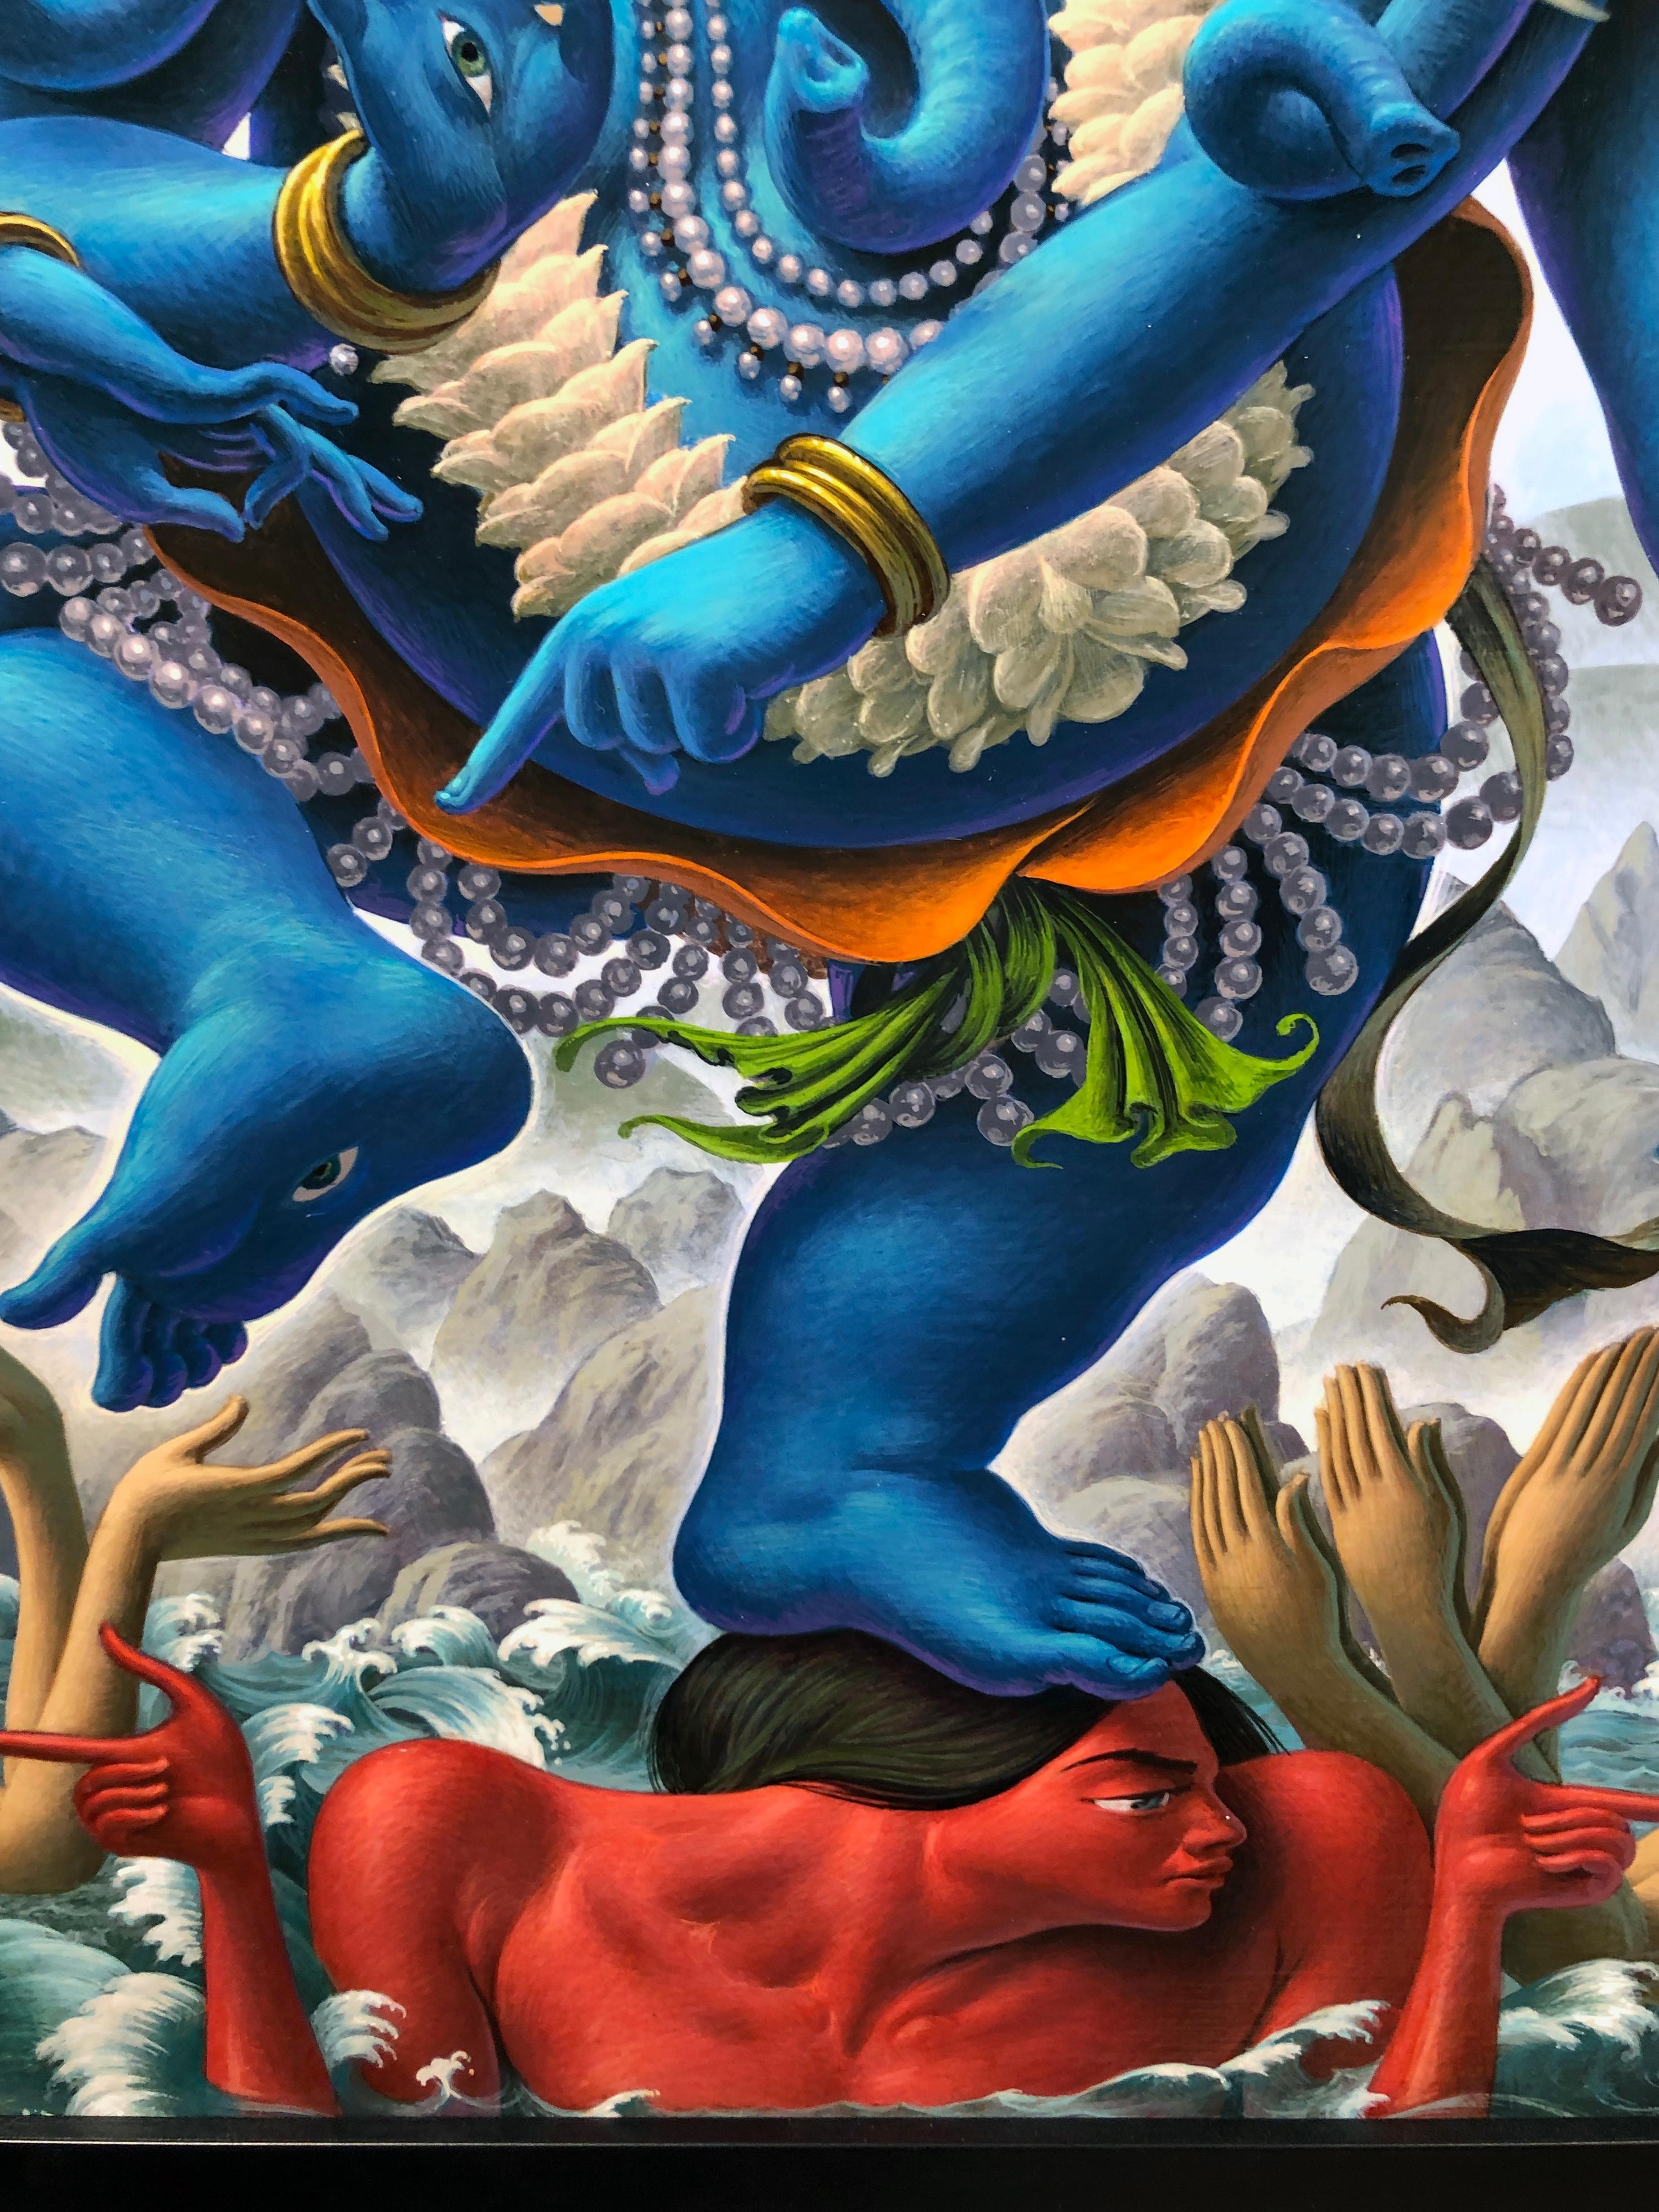 Ganesh at the Maelstrom - Highly Detailed Surreal, Symbolic Painting 2